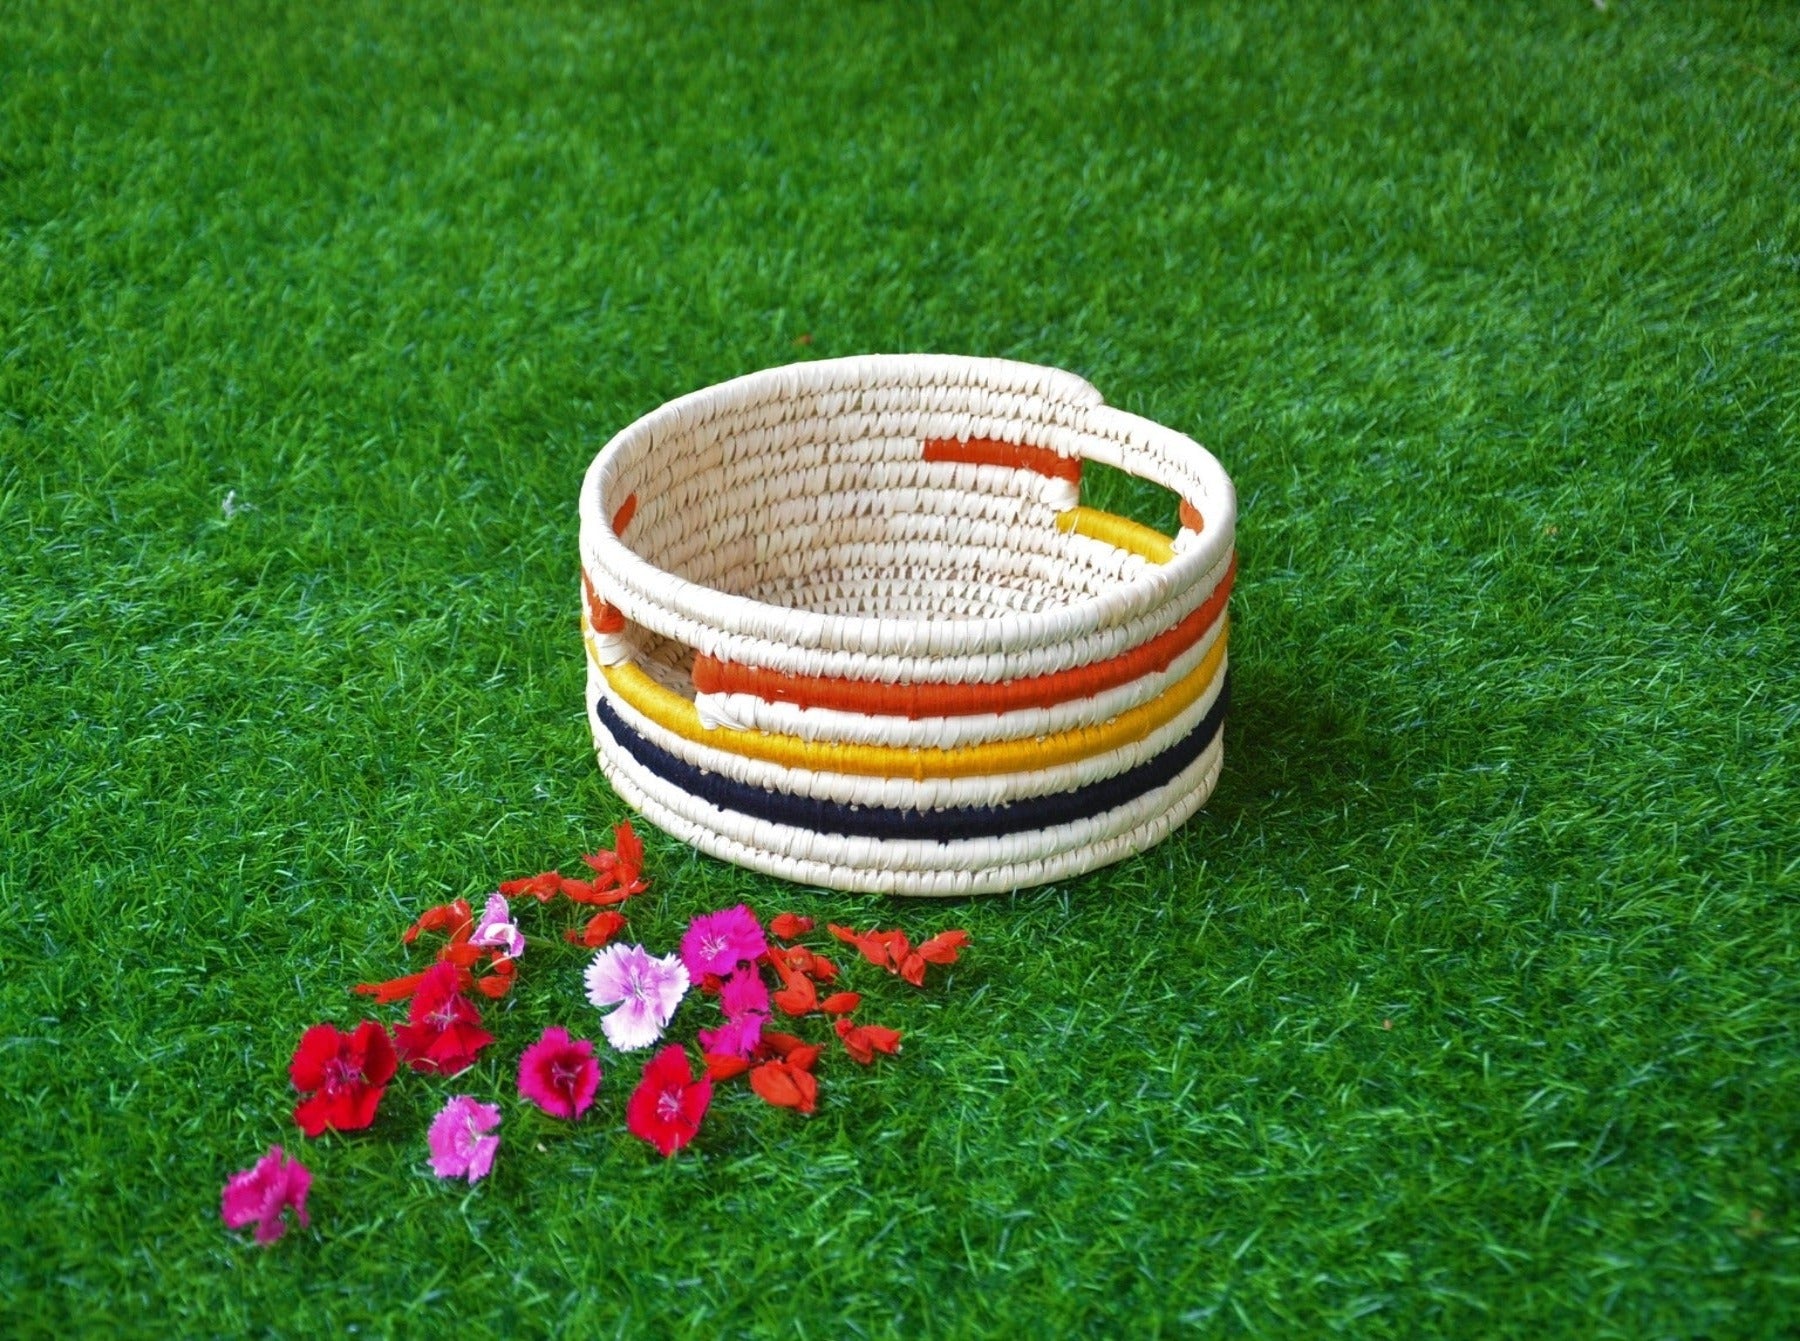 Handmade Patterned Basket Made By Natural fibers